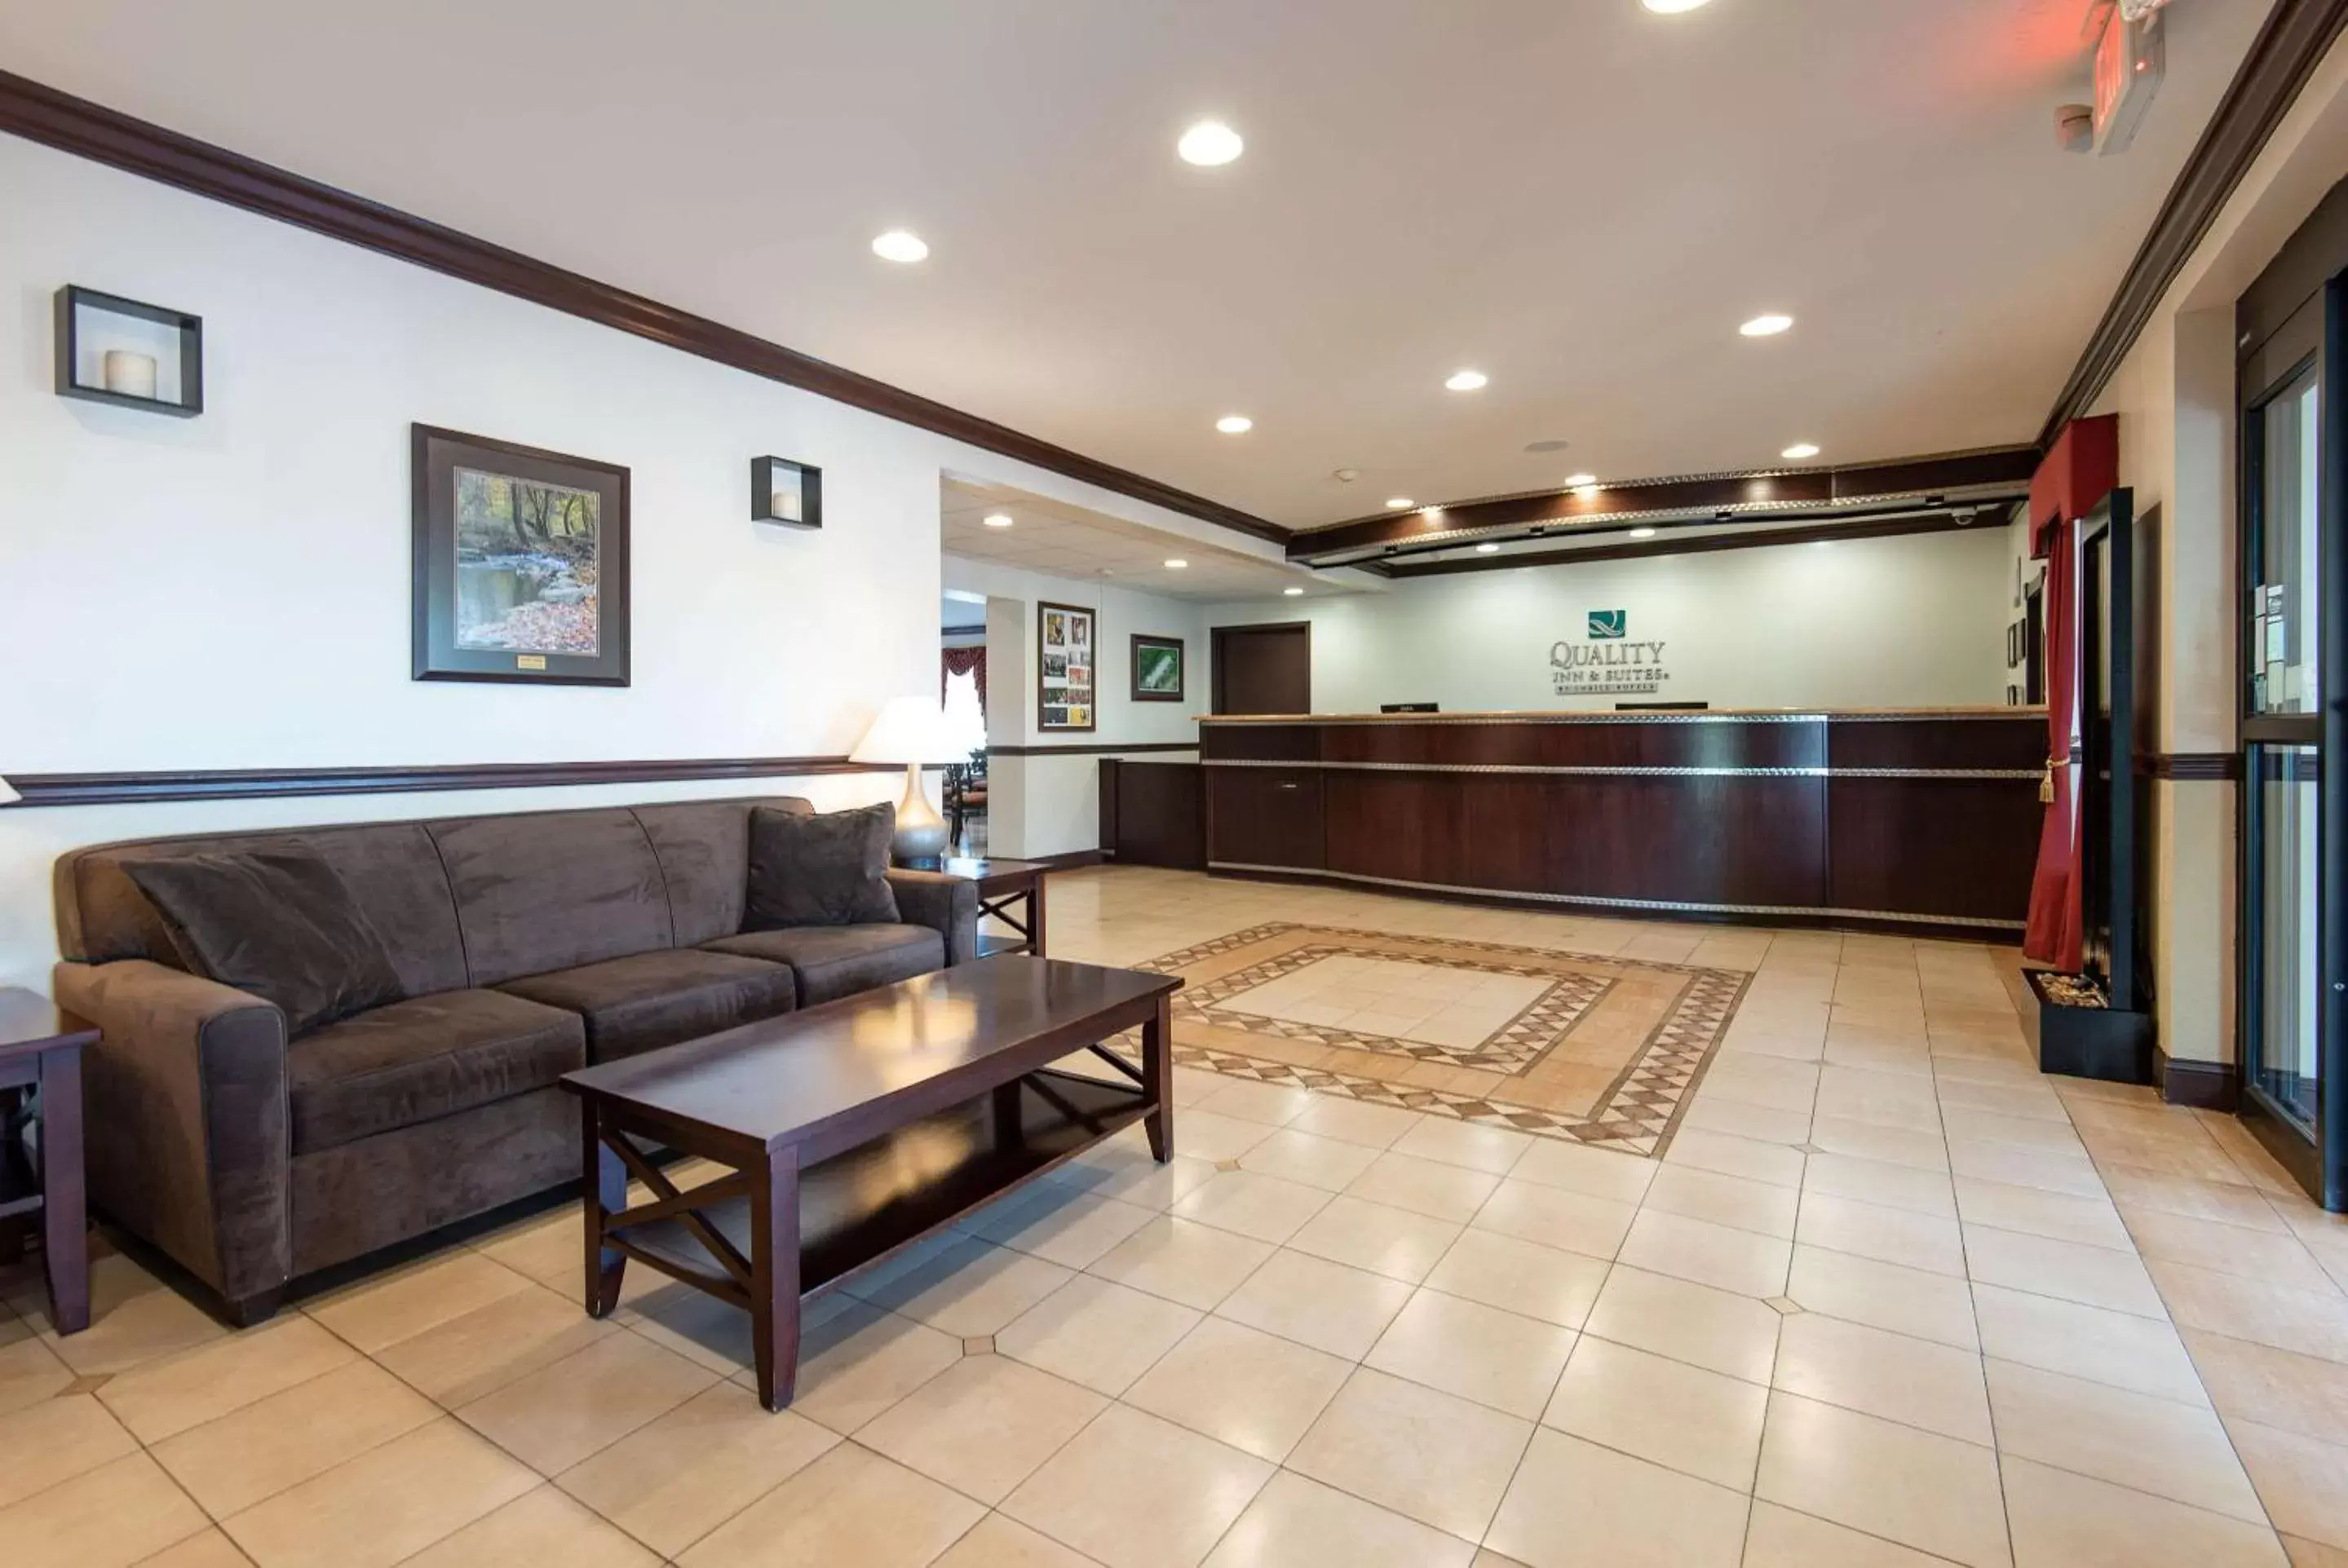 Lobby or reception, Lobby/Reception in Quality Inn & Suites Quakertown-Allentown